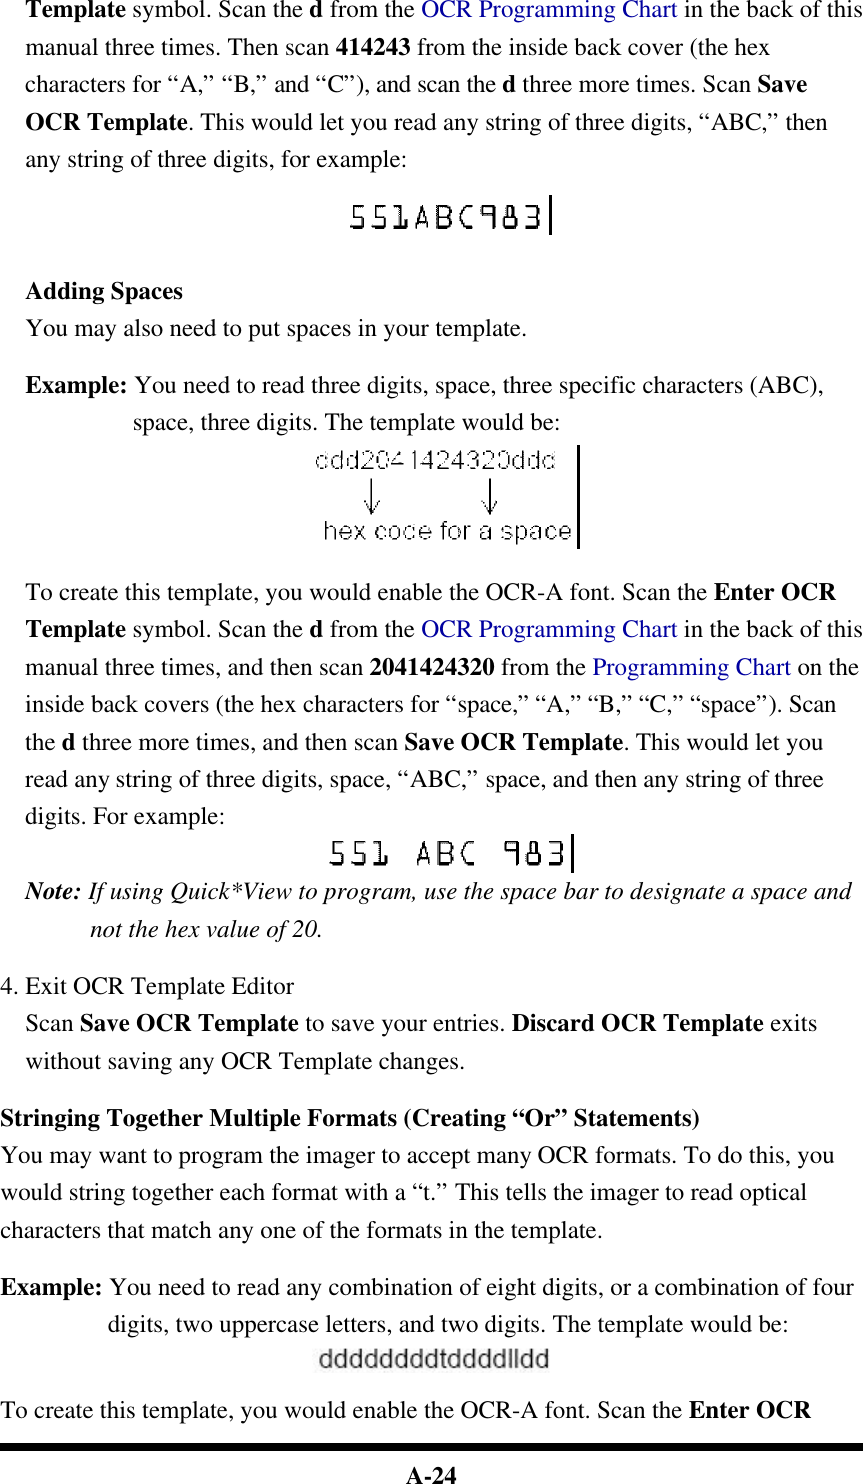  A-24 Template symbol. Scan the d from the OCR Programming Chart in the back of this manual three times. Then scan 414243 from the inside back cover (the hex characters for “A,” “B,” and “C”), and scan the d three more times. Scan Save OCR Template. This would let you read any string of three digits, “ABC,” then any string of three digits, for example:   Adding Spaces You may also need to put spaces in your template.  Example: You need to read three digits, space, three specific characters (ABC), space, three digits. The template would be:   To create this template, you would enable the OCR-A font. Scan the Enter OCR Template symbol. Scan the d from the OCR Programming Chart in the back of this manual three times, and then scan 2041424320 from the Programming Chart on the inside back covers (the hex characters for “space,” “A,” “B,” “C,” “space”). Scan the d three more times, and then scan Save OCR Template. This would let you read any string of three digits, space, “ABC,” space, and then any string of three digits. For example:  Note: If using Quick*View to program, use the space bar to designate a space and not the hex value of 20.  4. Exit OCR Template Editor Scan Save OCR Template to save your entries. Discard OCR Template exits without saving any OCR Template changes.  Stringing Together Multiple Formats (Creating “Or” Statements) You may want to program the imager to accept many OCR formats. To do this, you would string together each format with a “t.” This tells the imager to read optical characters that match any one of the formats in the template.  Example: You need to read any combination of eight digits, or a combination of four digits, two uppercase letters, and two digits. The template would be:   To create this template, you would enable the OCR-A font. Scan the Enter OCR 